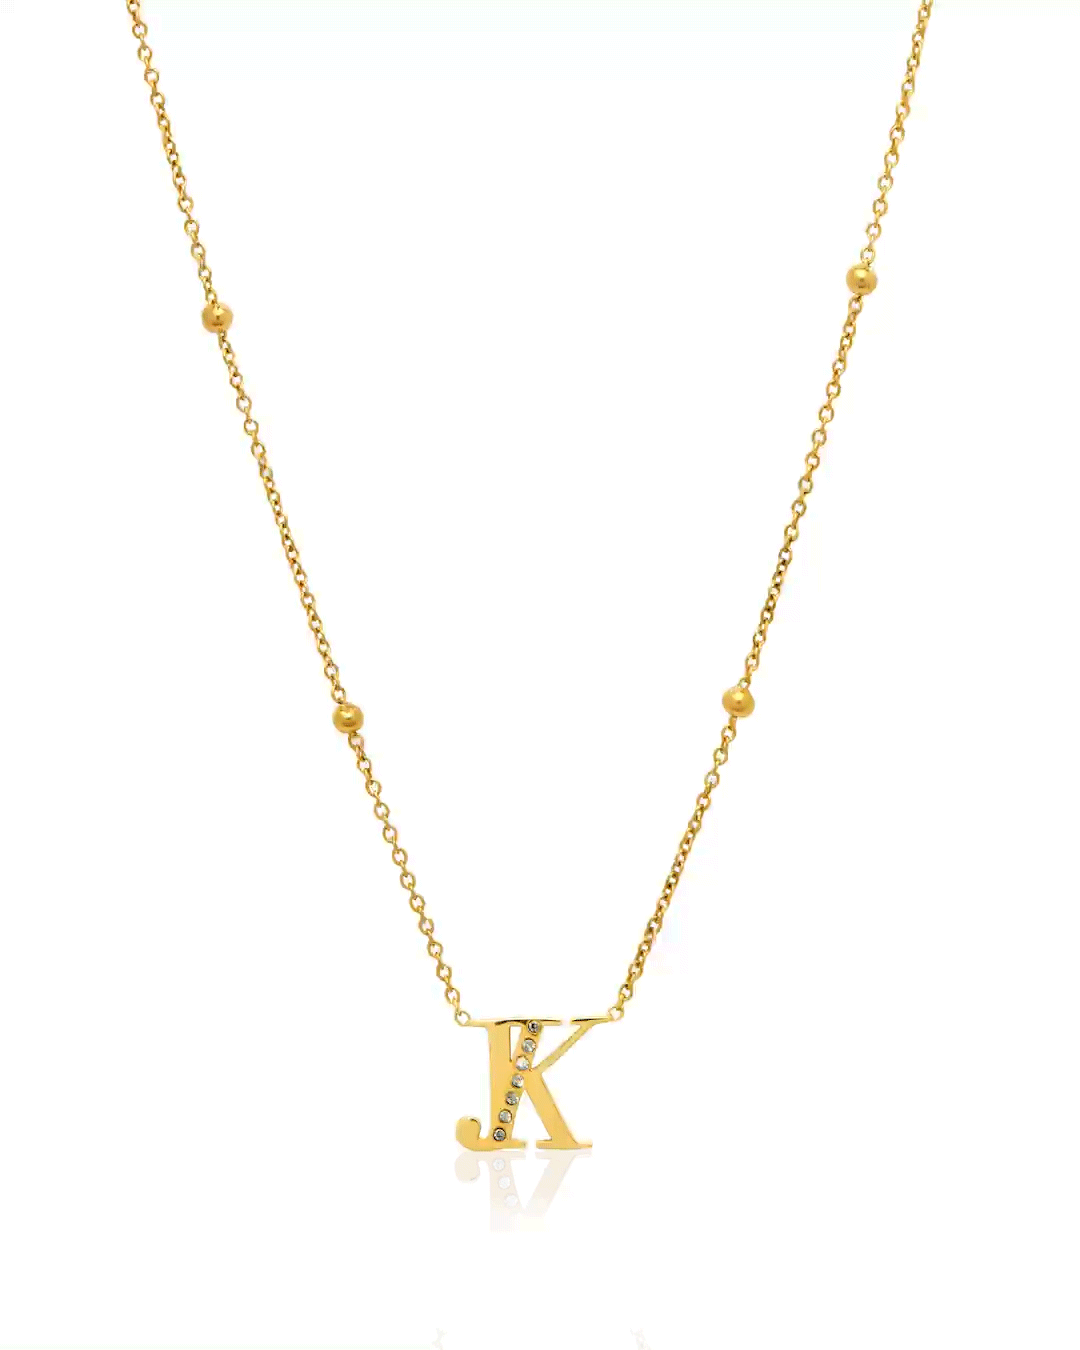 Update After 6 Months: Louis Vuitton Chain Links Necklace Review